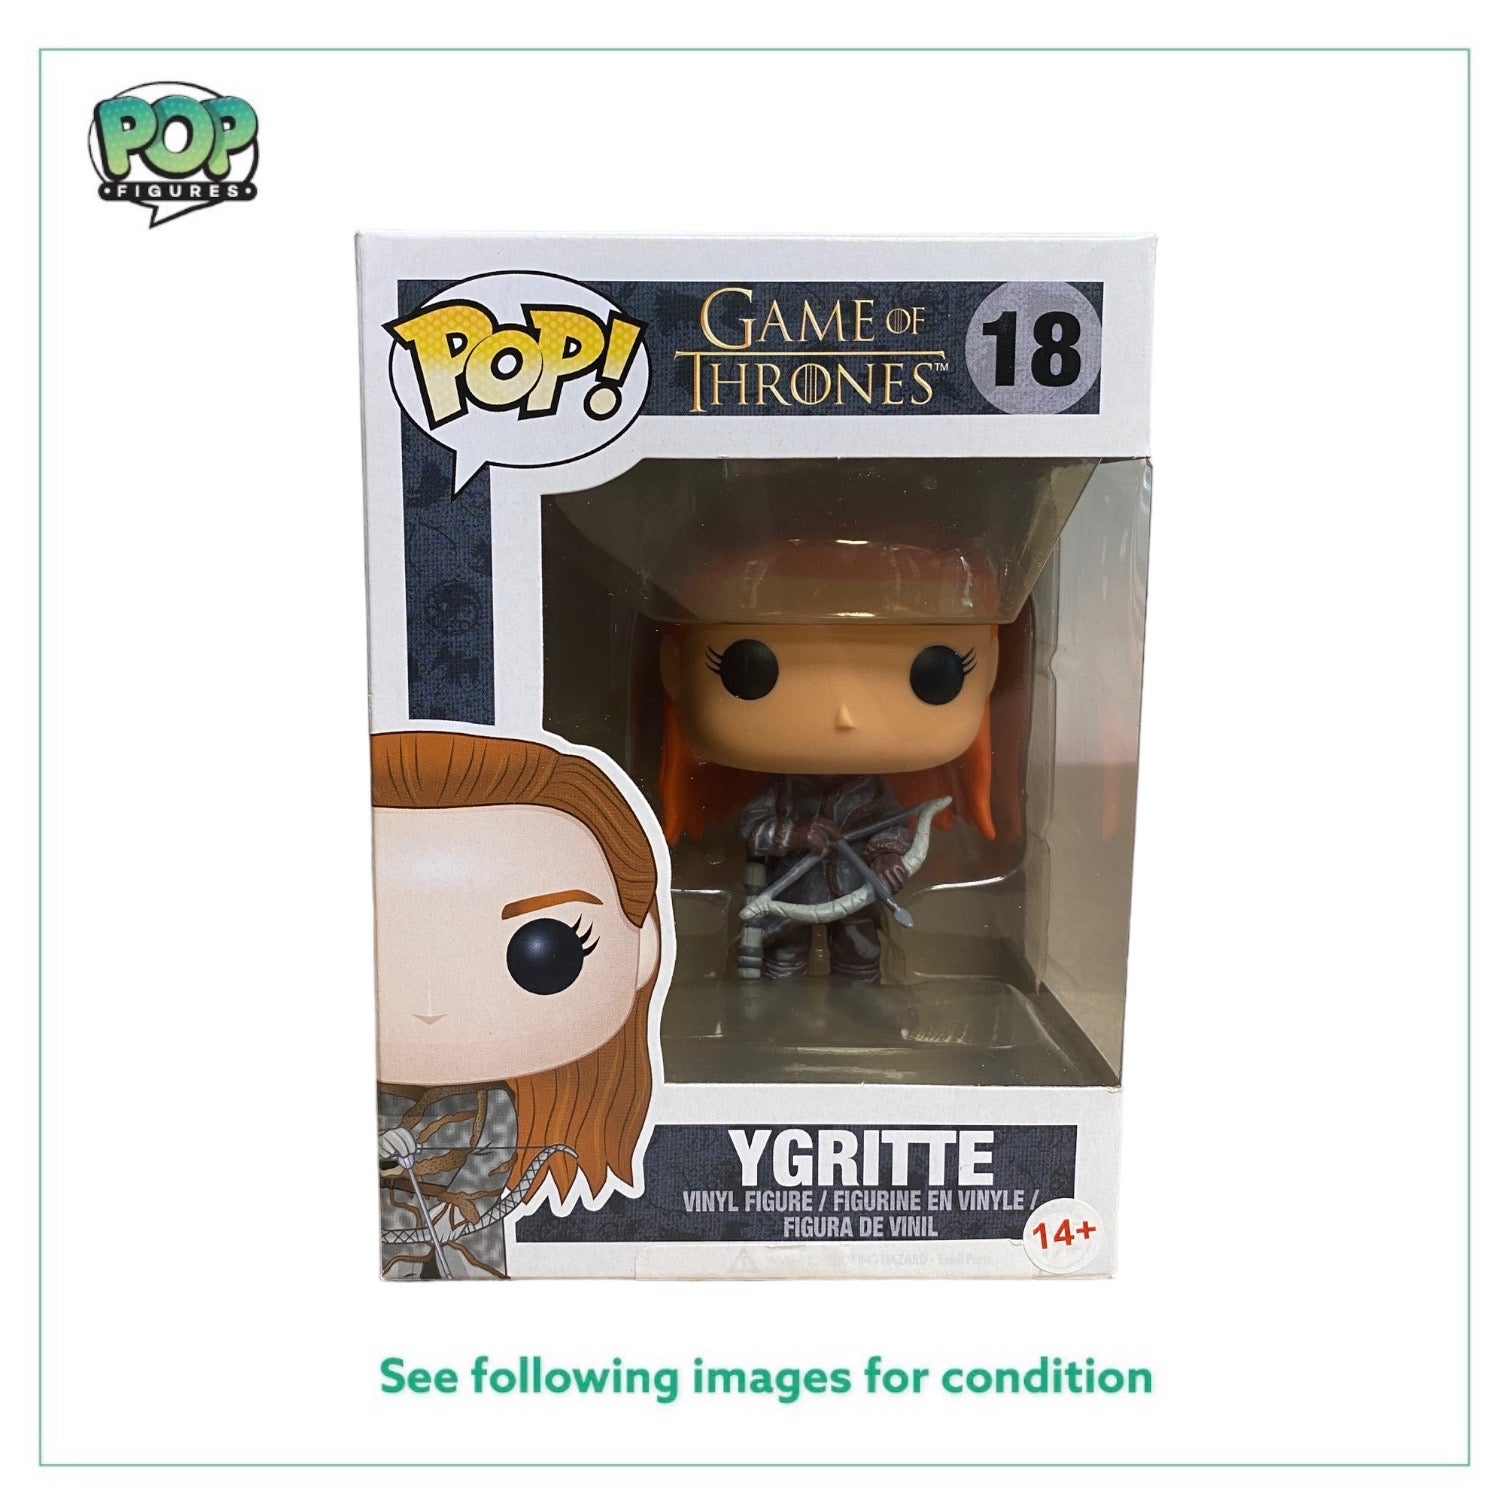 Ygritte #18 Funko Pop! - Game Of Thrones - 2014 Pop! - Condition 8.75/10